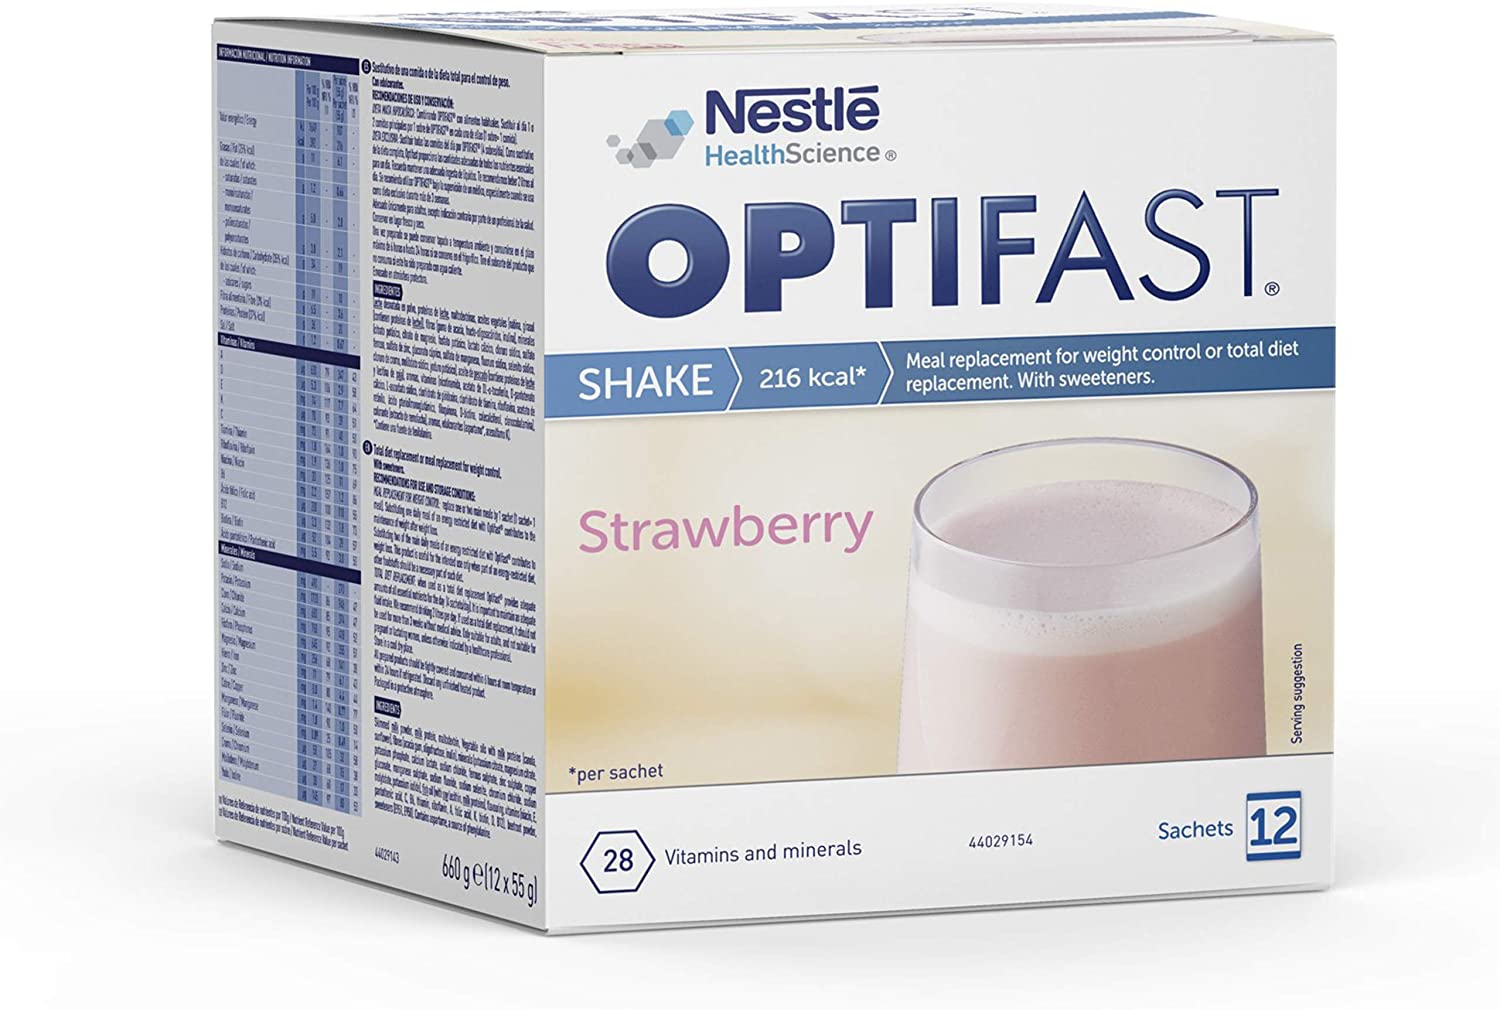 shake-replacement-for-weight-loss-nestle-optifast.jpg